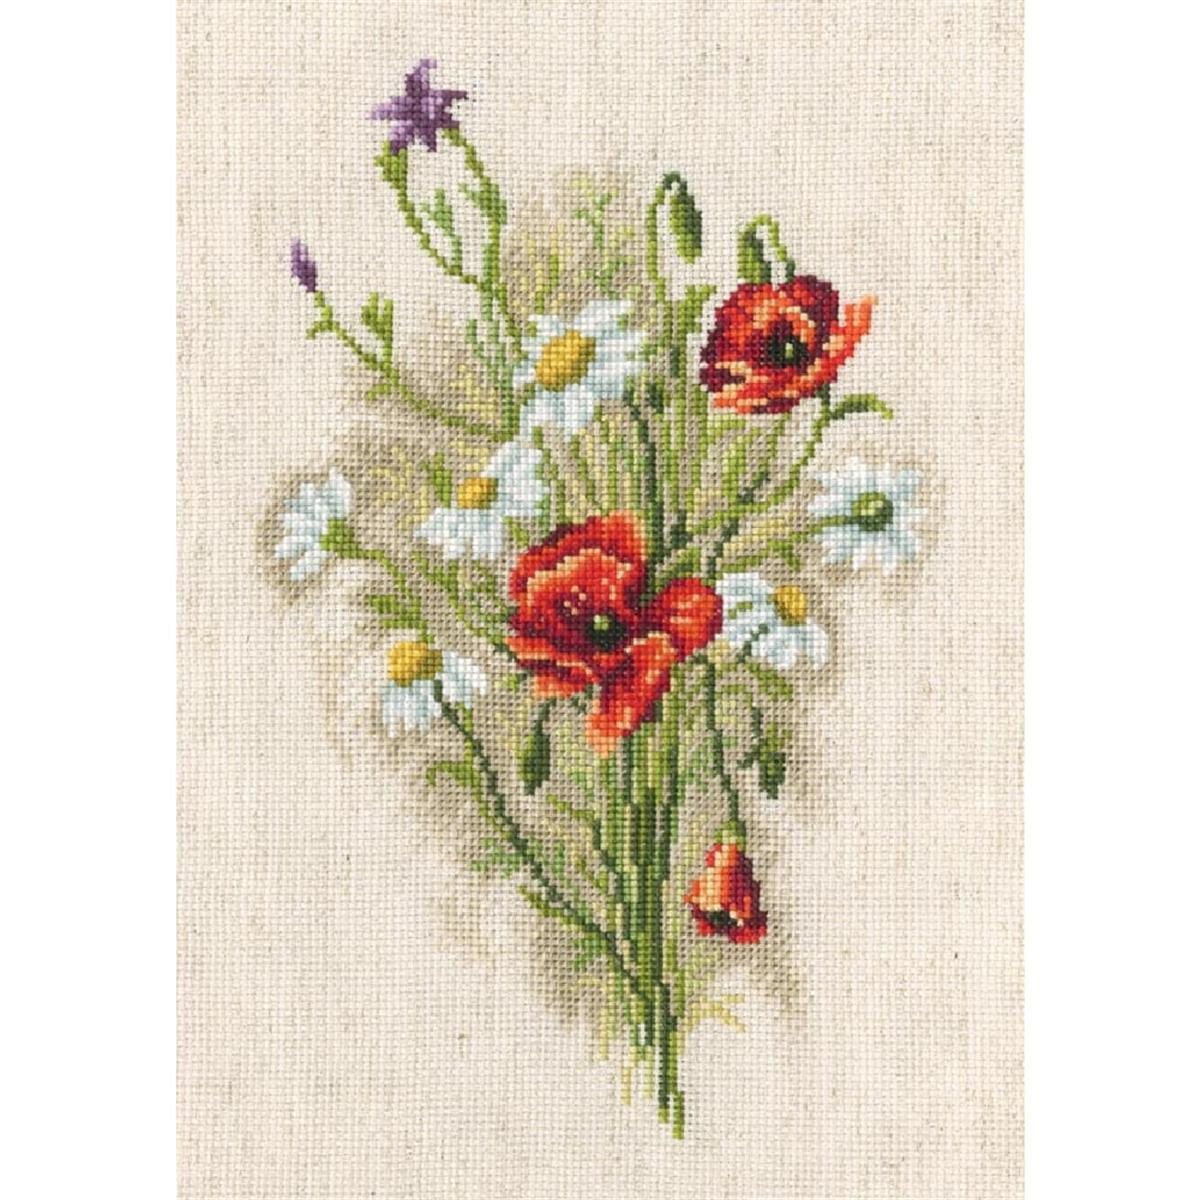 RTO counted Cross Stitch Kit "Bouquet with...